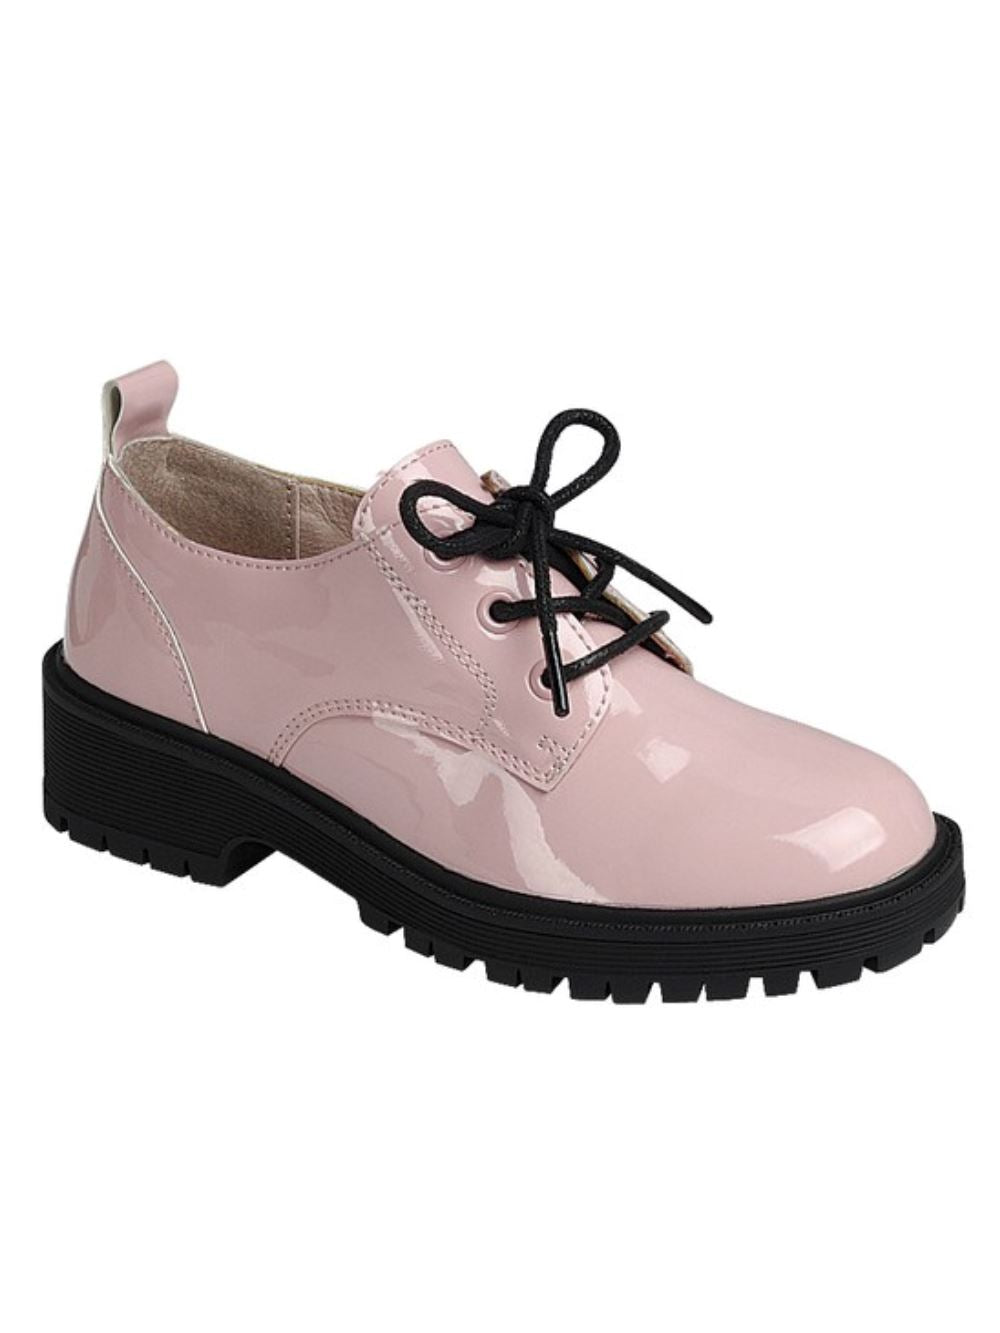 Girls Pink Patent Leather Lace Oxford Shoes - Sydney So Sweet